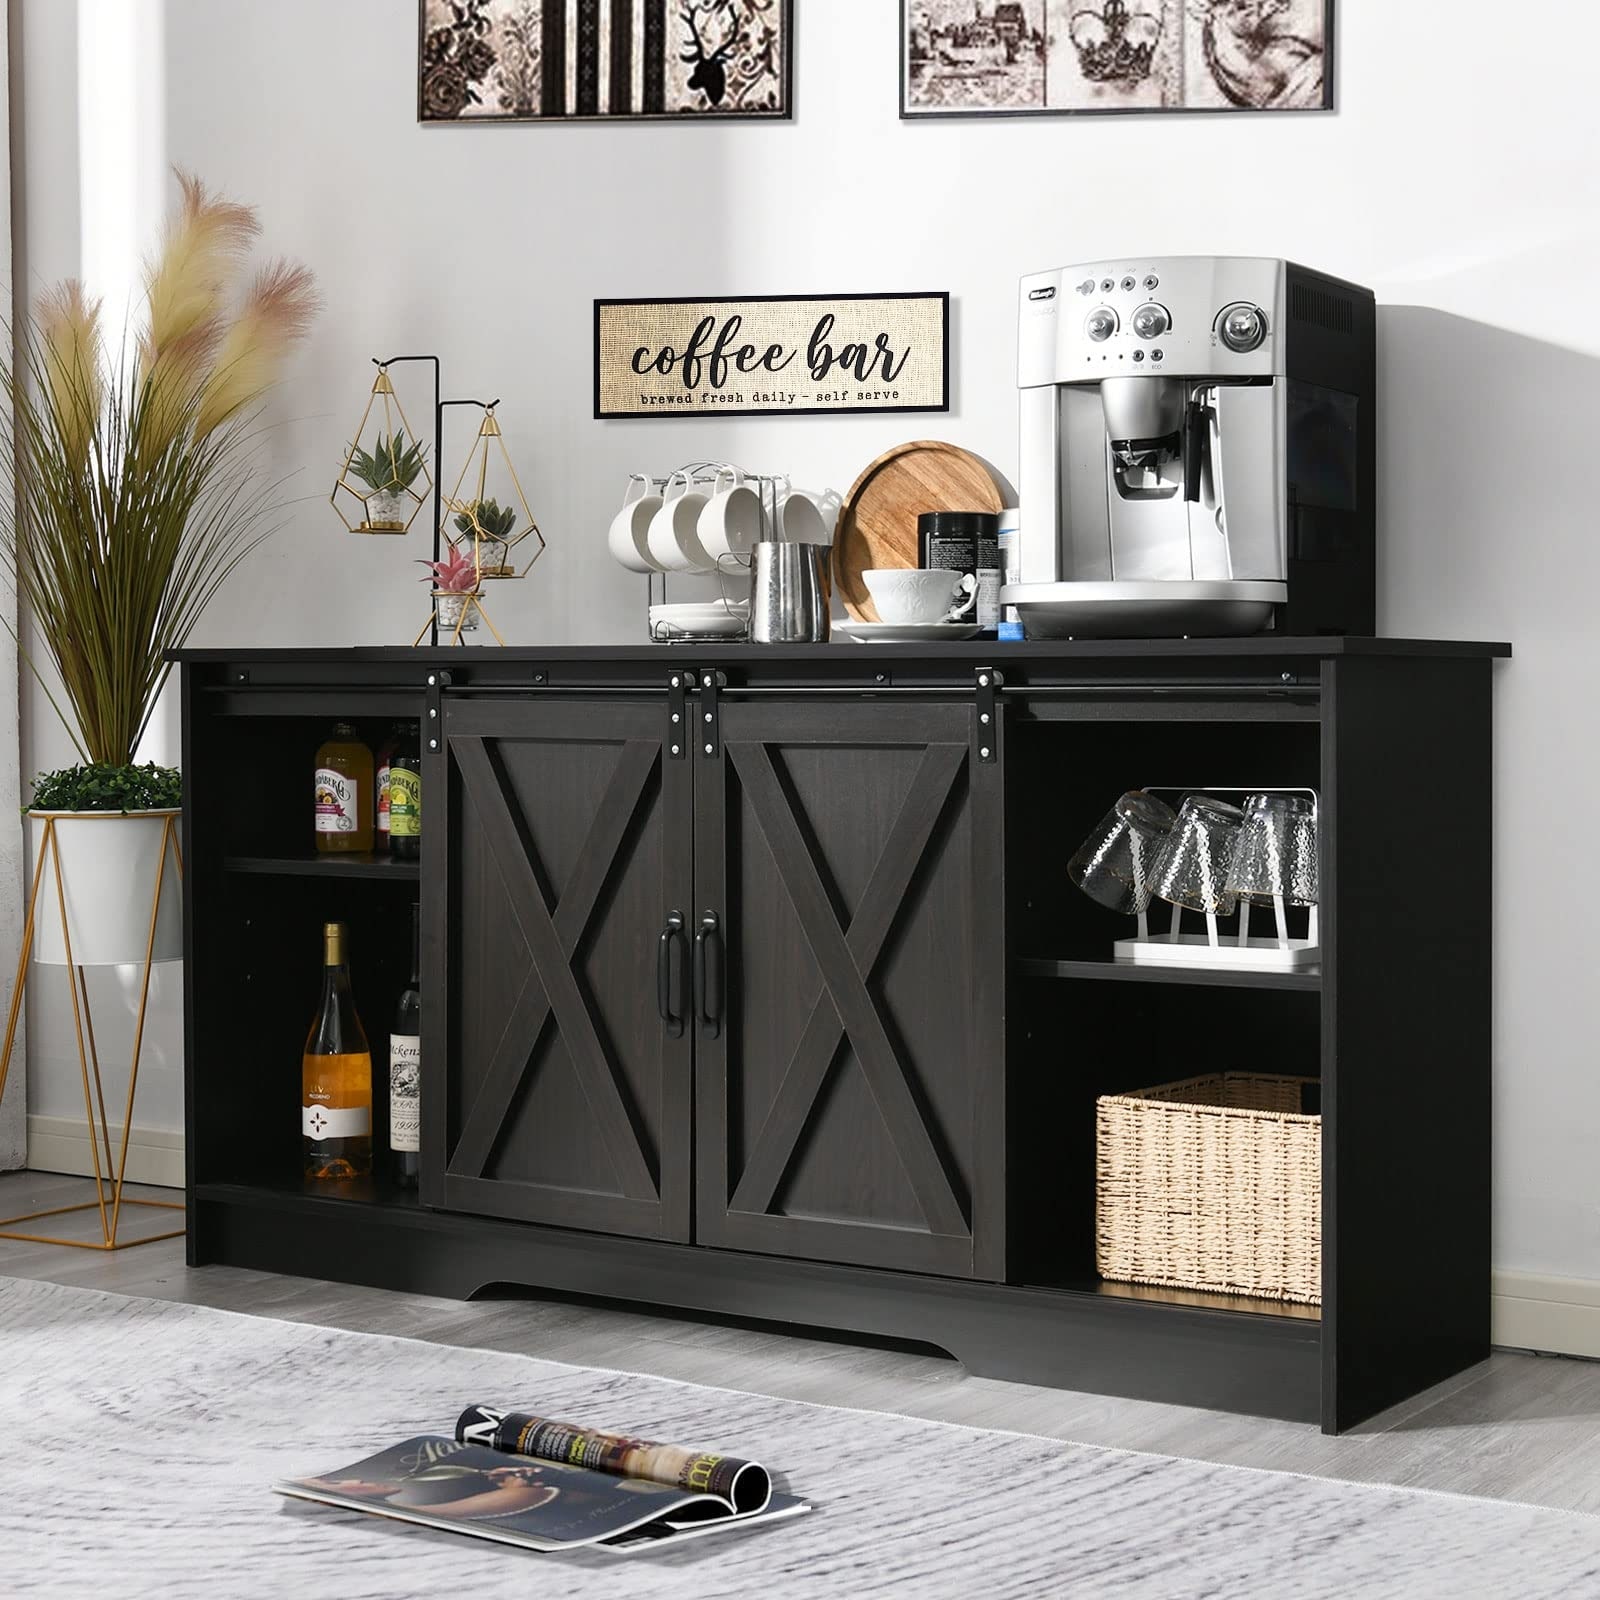 https://ak1.ostkcdn.com/images/products/is/images/direct/d20b514eef94e795a59a0e7435143ec436ff26c7/Buffet-Cabinet-with-Storage-and-Barn-Doors%2C-Farmhouse-Coffee-Bar-Sideboard-Storage-Cabinet-for-Living-Room-Dinning-Room-Kitchen.jpg